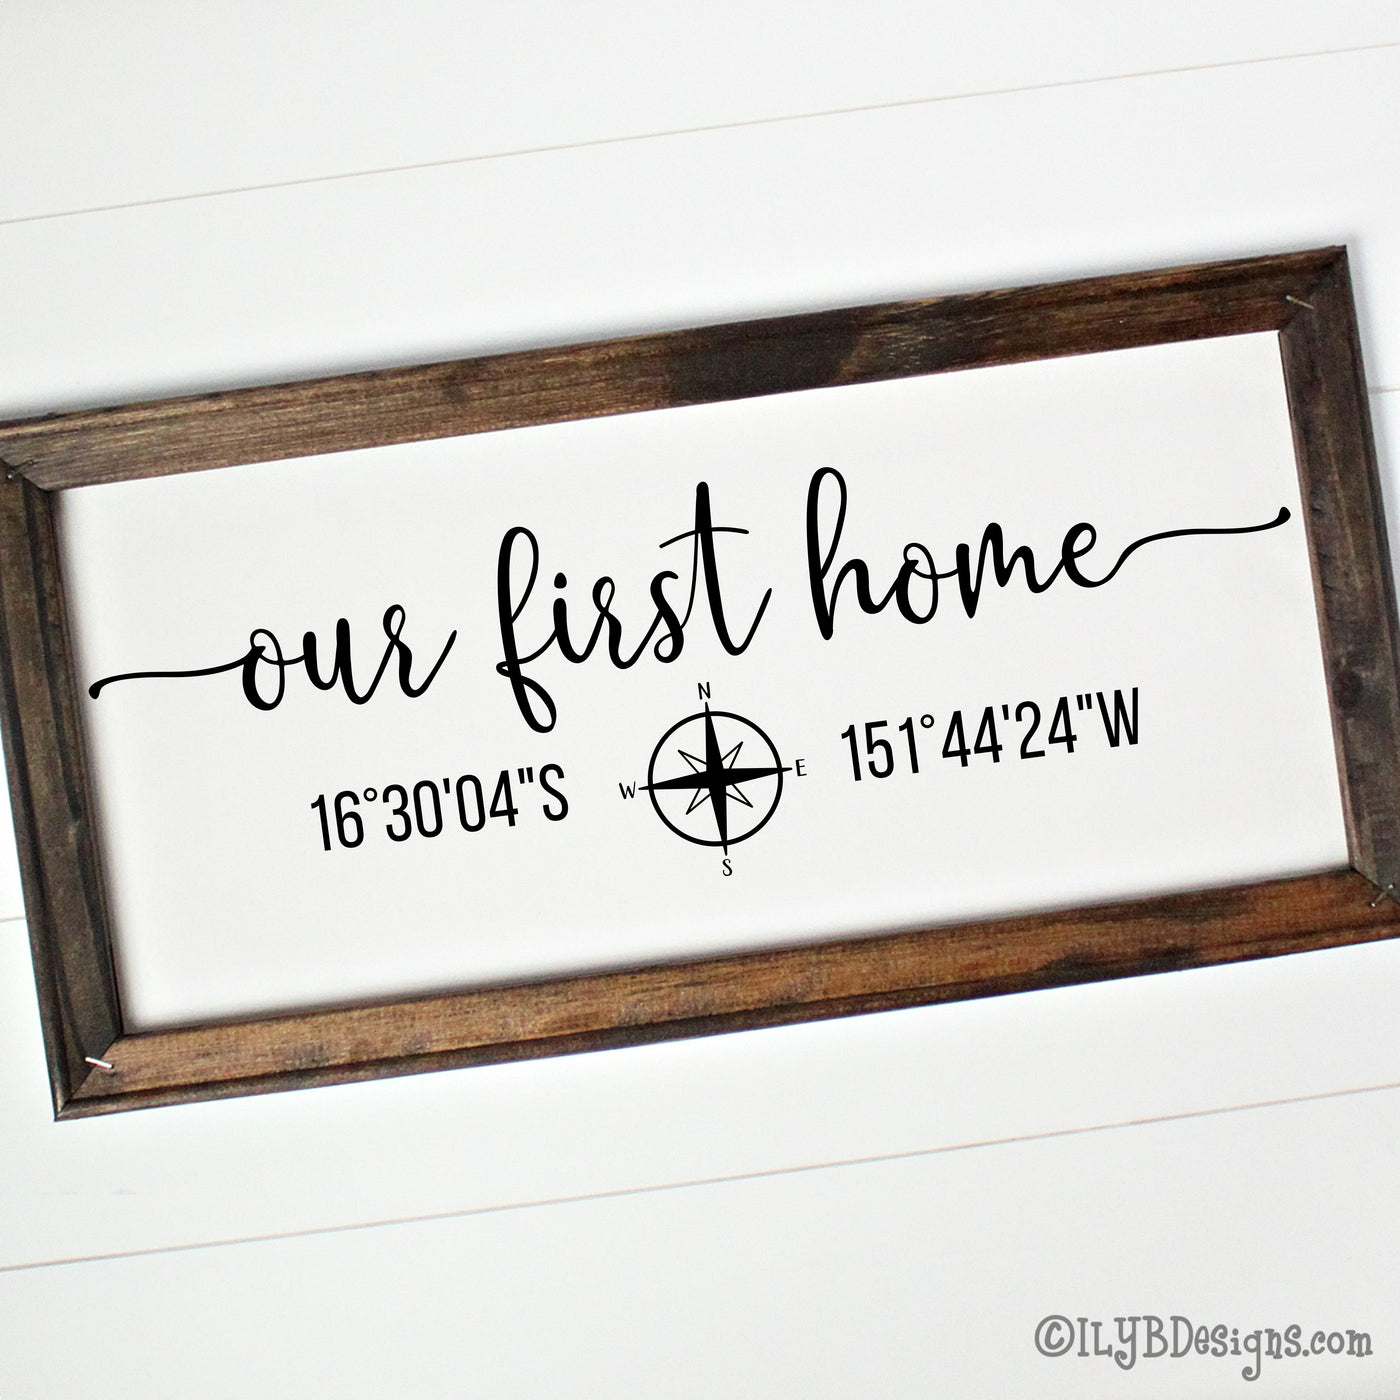 Our first home in a script font with a compass under the script and latitude and longitude coordinates on each side of the compass. Design is black on a white canvas and in a dark walnut stained wood frame.